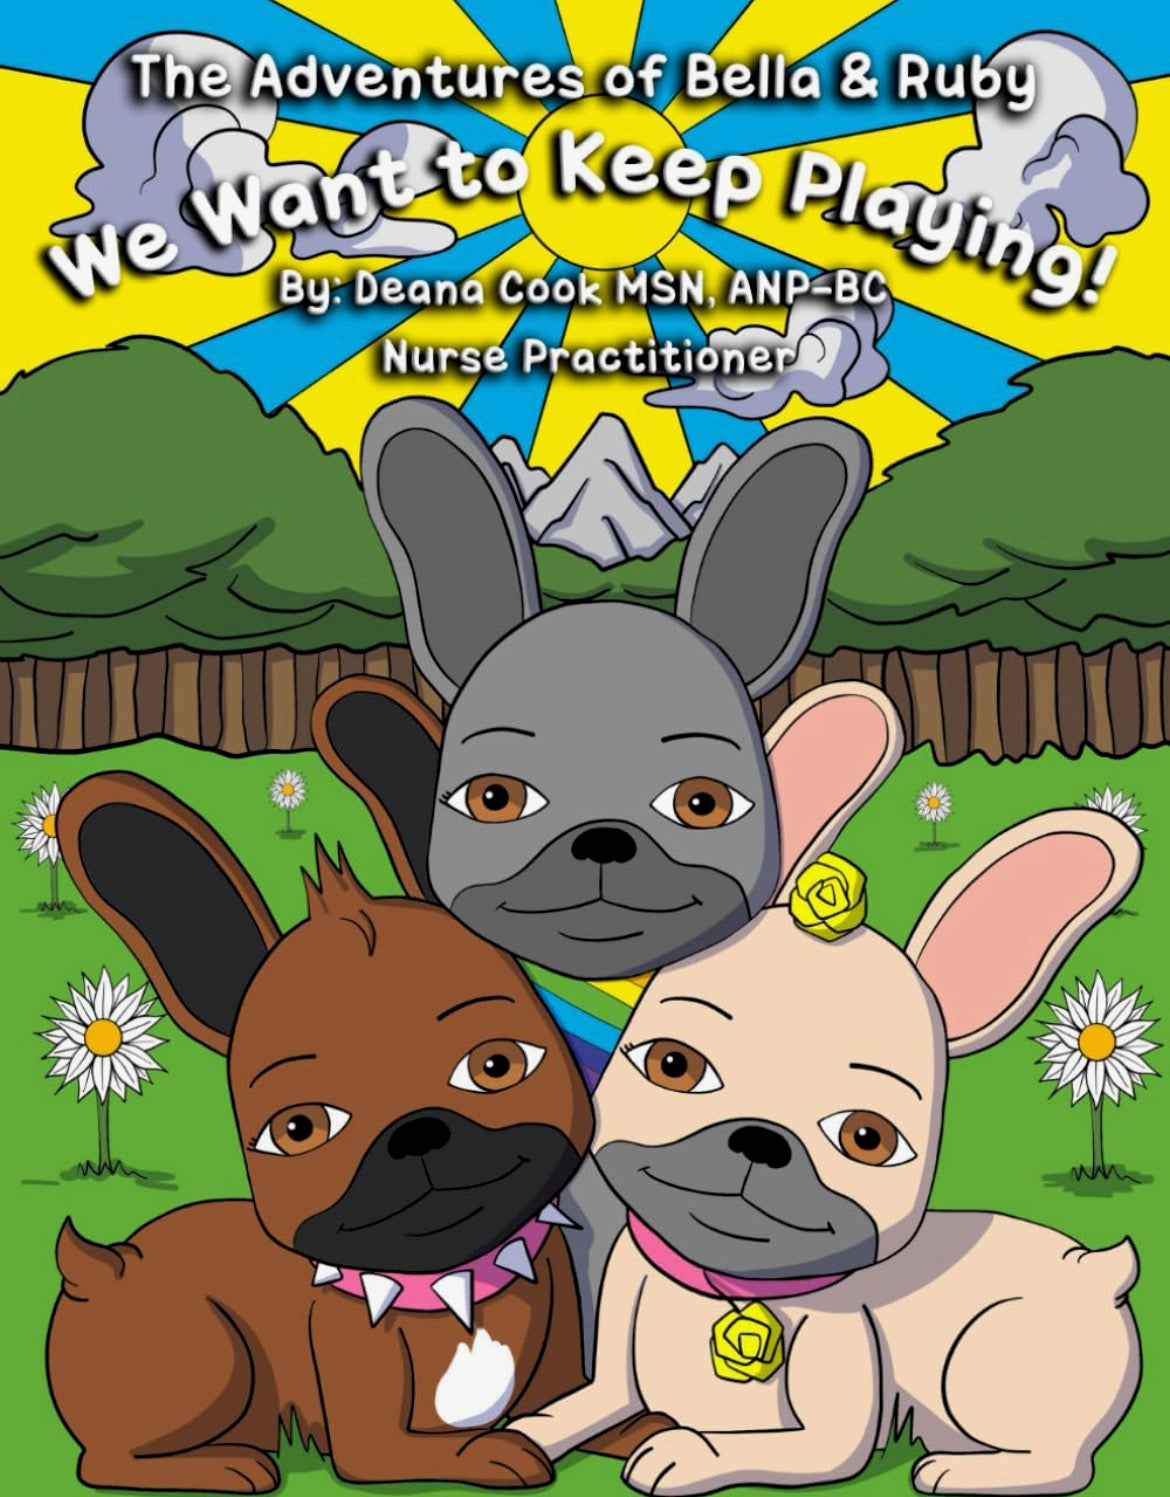 We Want to Keep Playing! Children's Book (paperback)